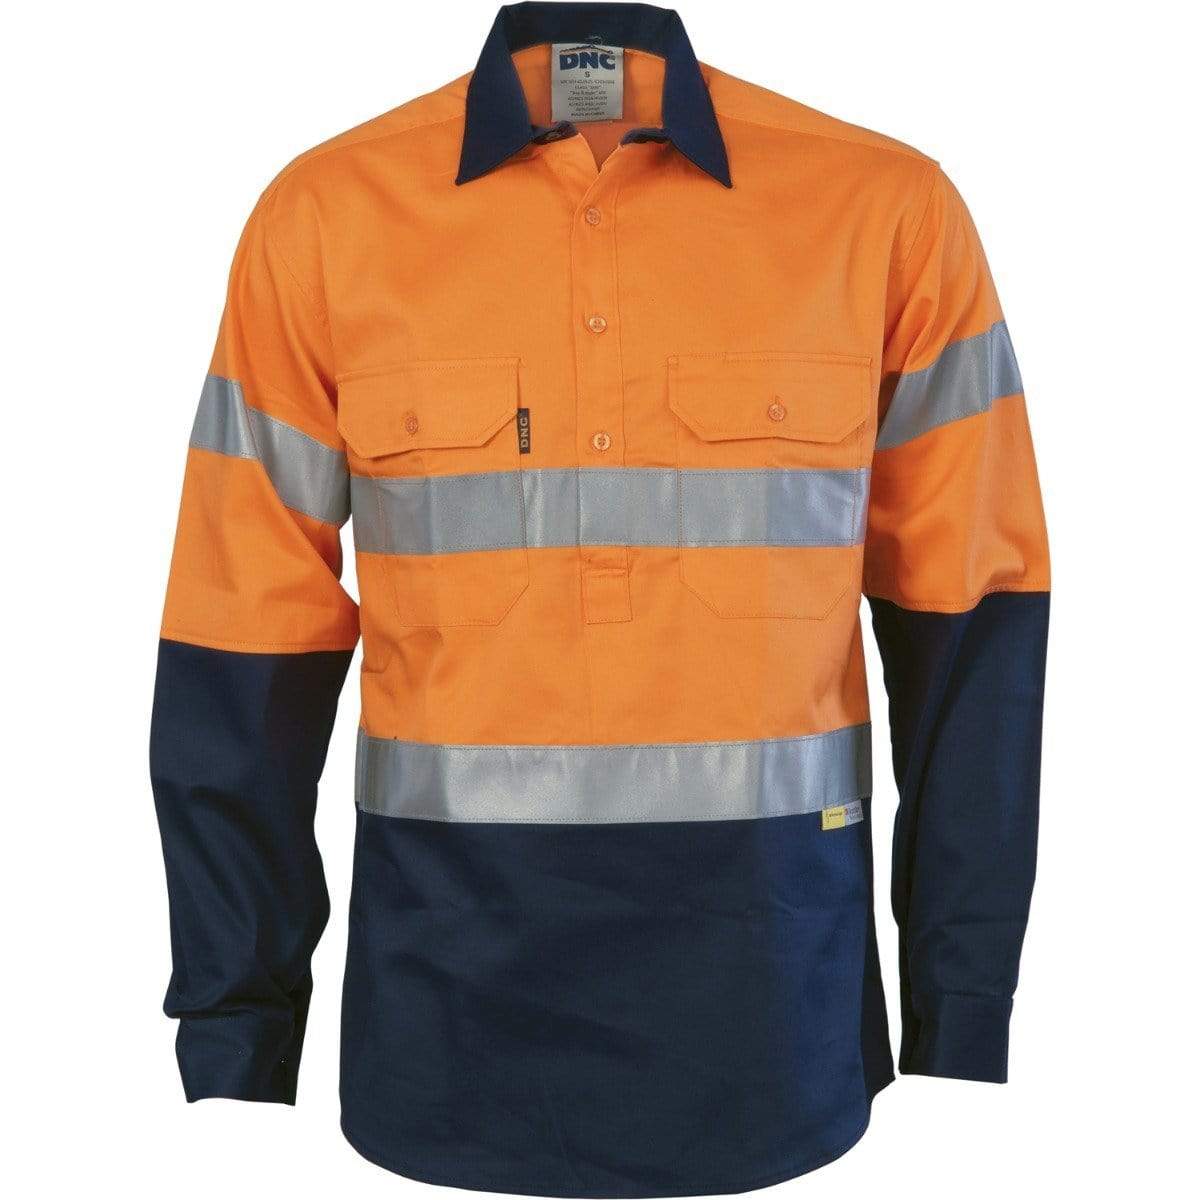 Dnc Workwear Hi-vis Two-tone Closed Front Cotton Shirt With 3m R/tape - 3849 Work Wear DNC Workwear Orange/Navy S 